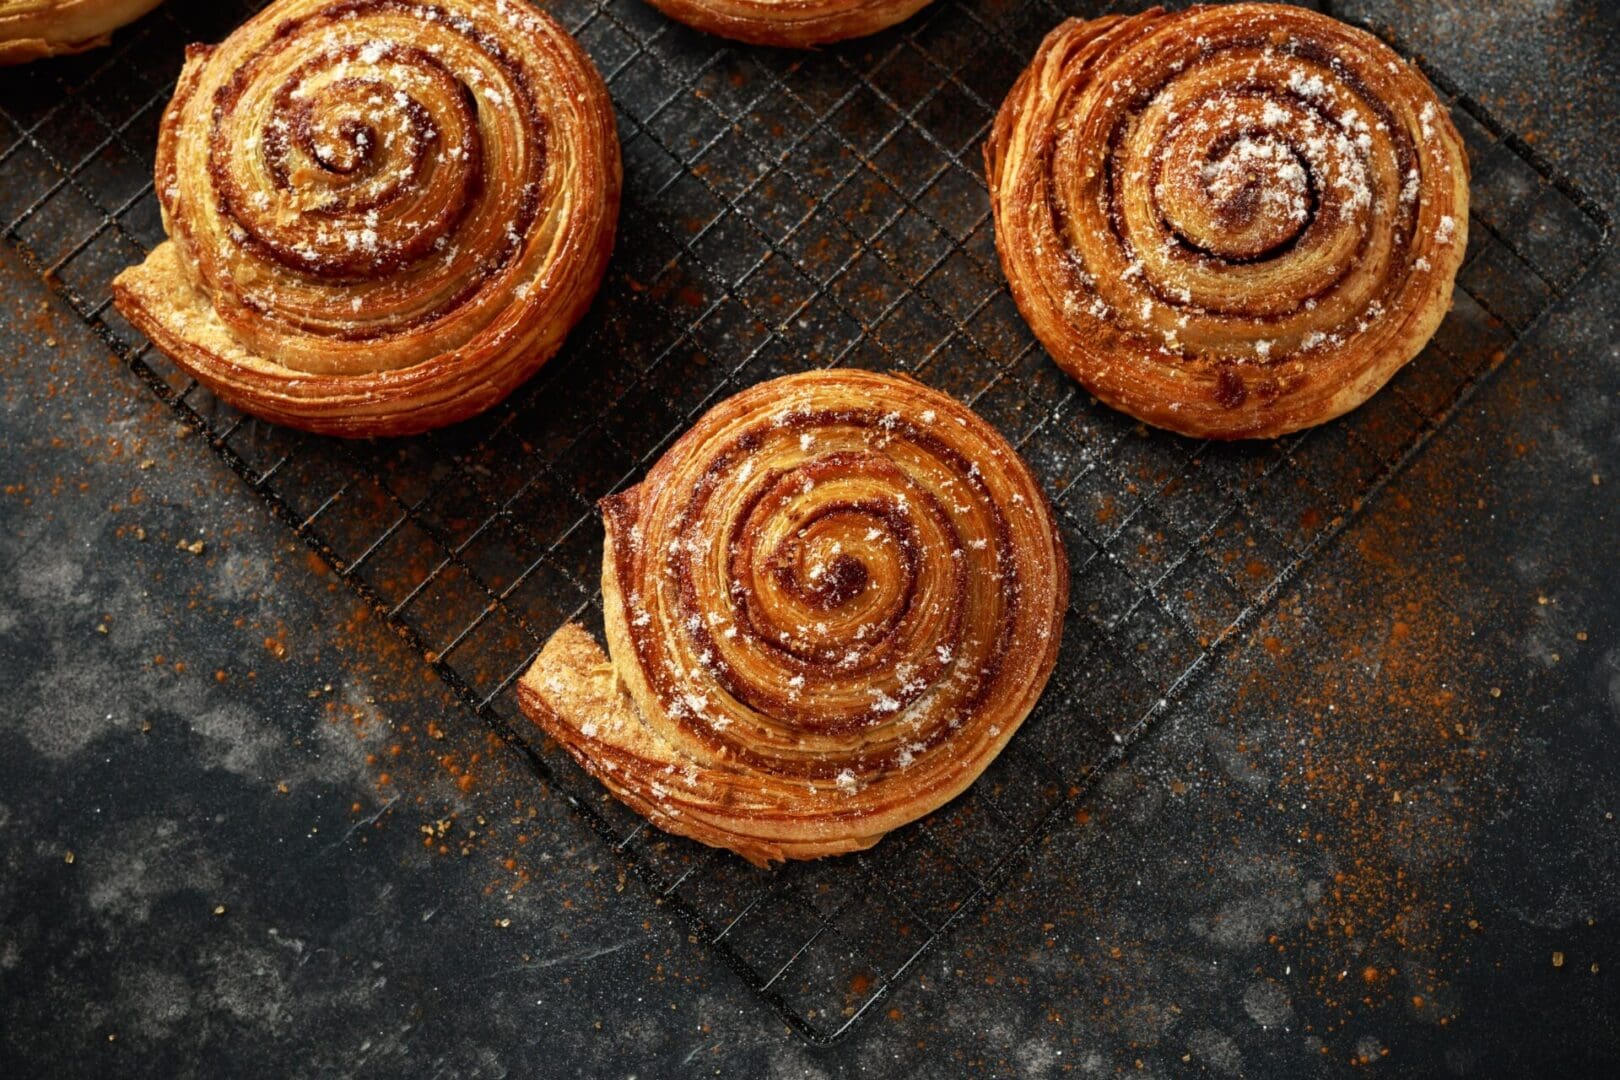 A close up of some cinnamon rolls on a cooling rack